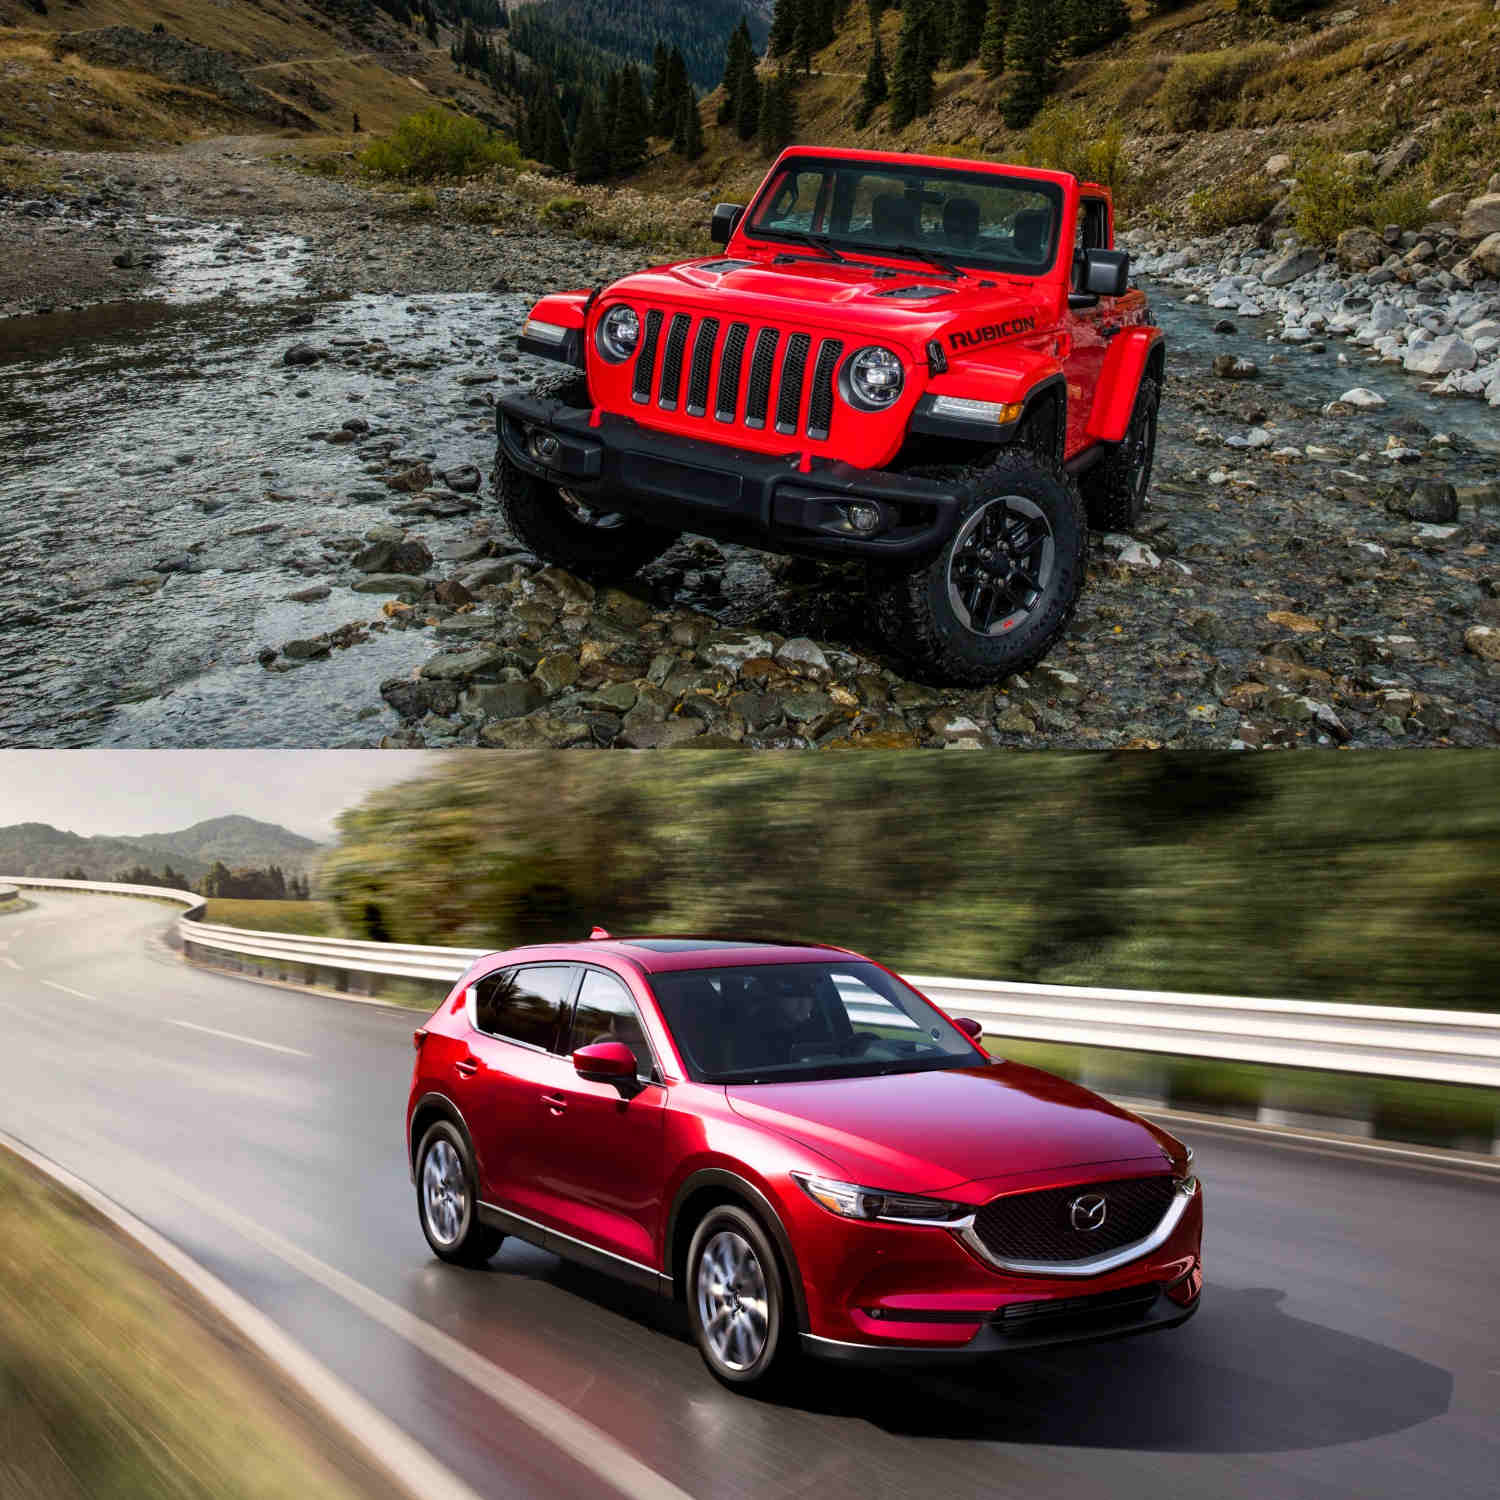 The best used SUV battle between this Mazda and Jeep continues